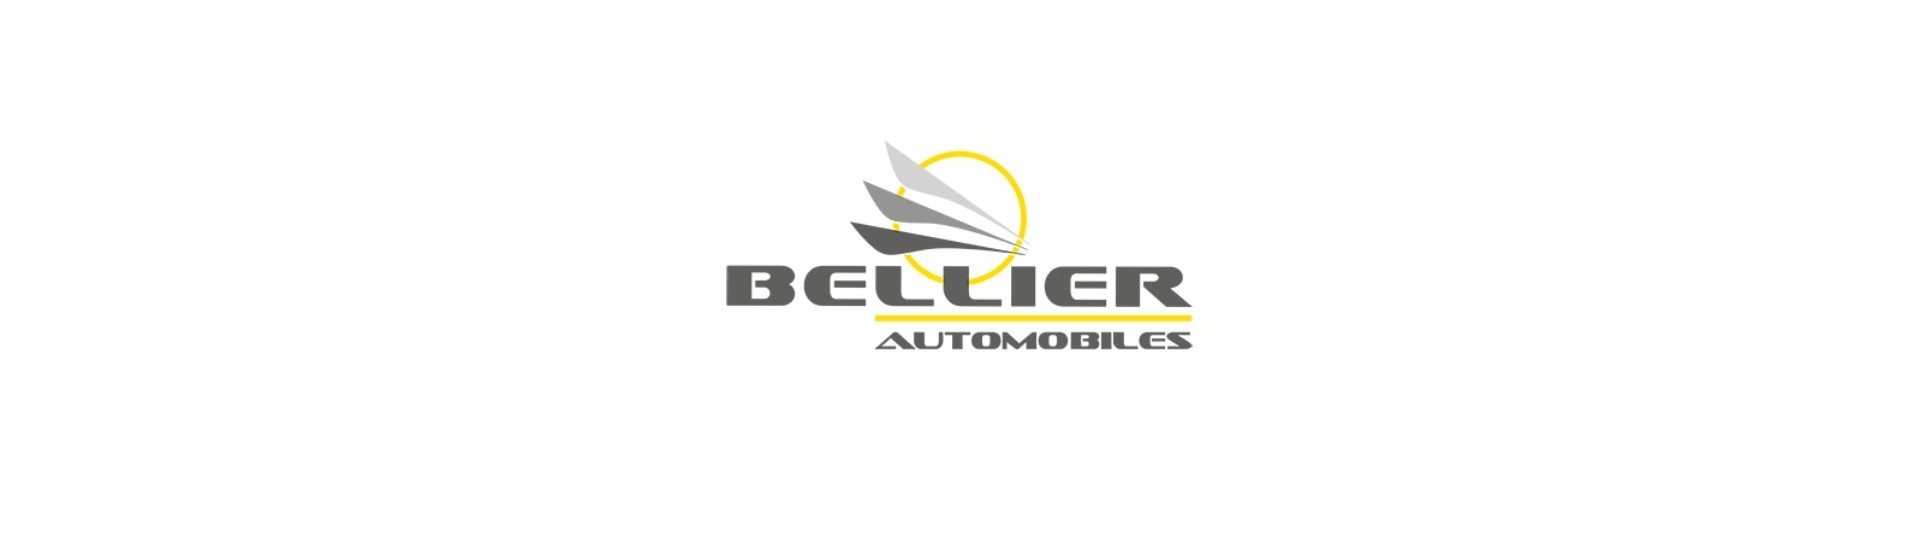 Painting builder for car without license Bellier